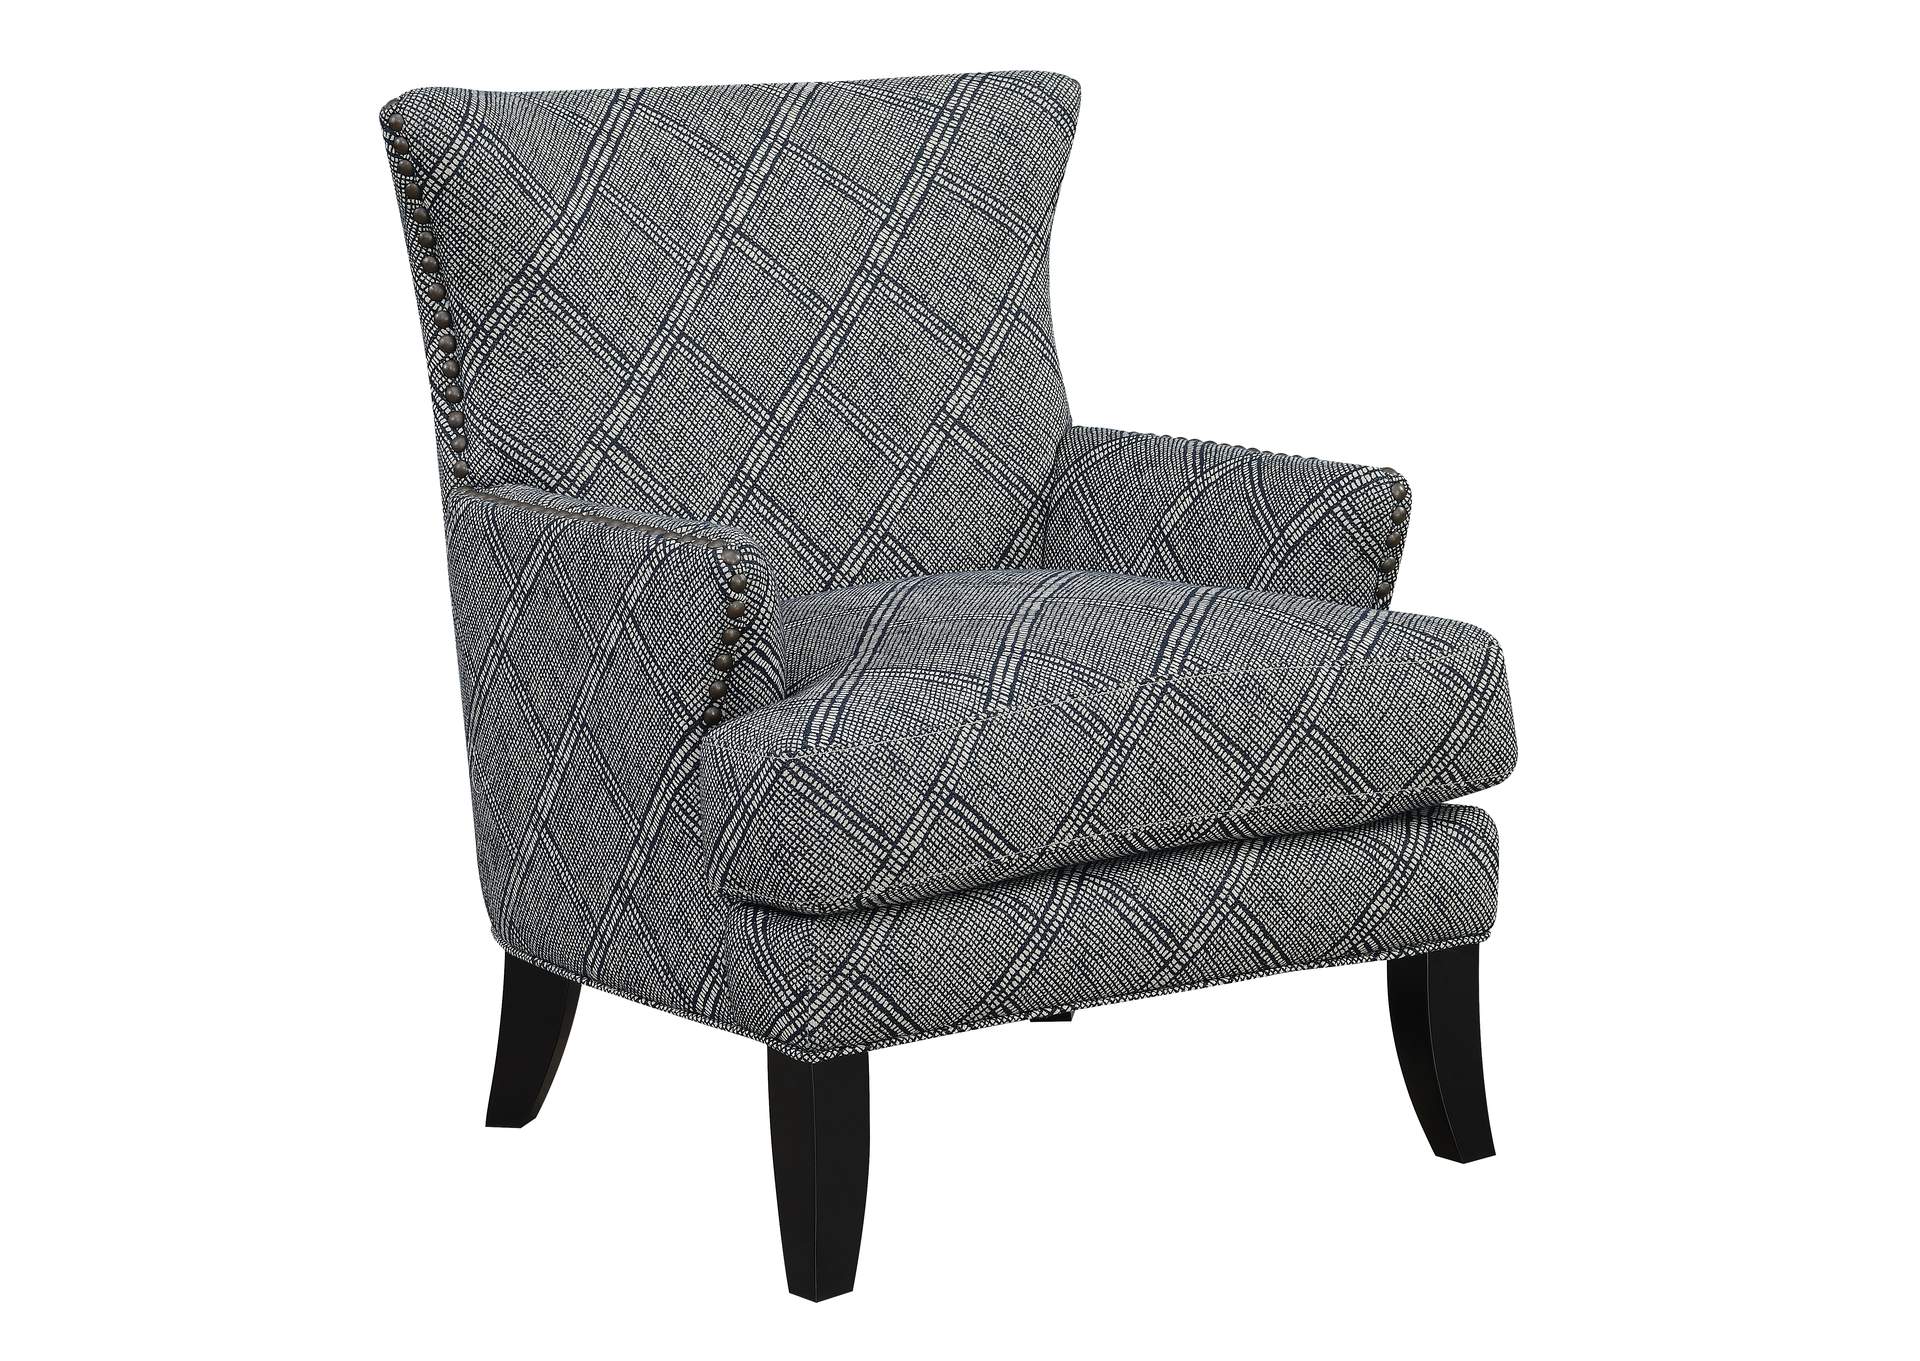 Nola Accent Chair,Emerald Home Furnishings